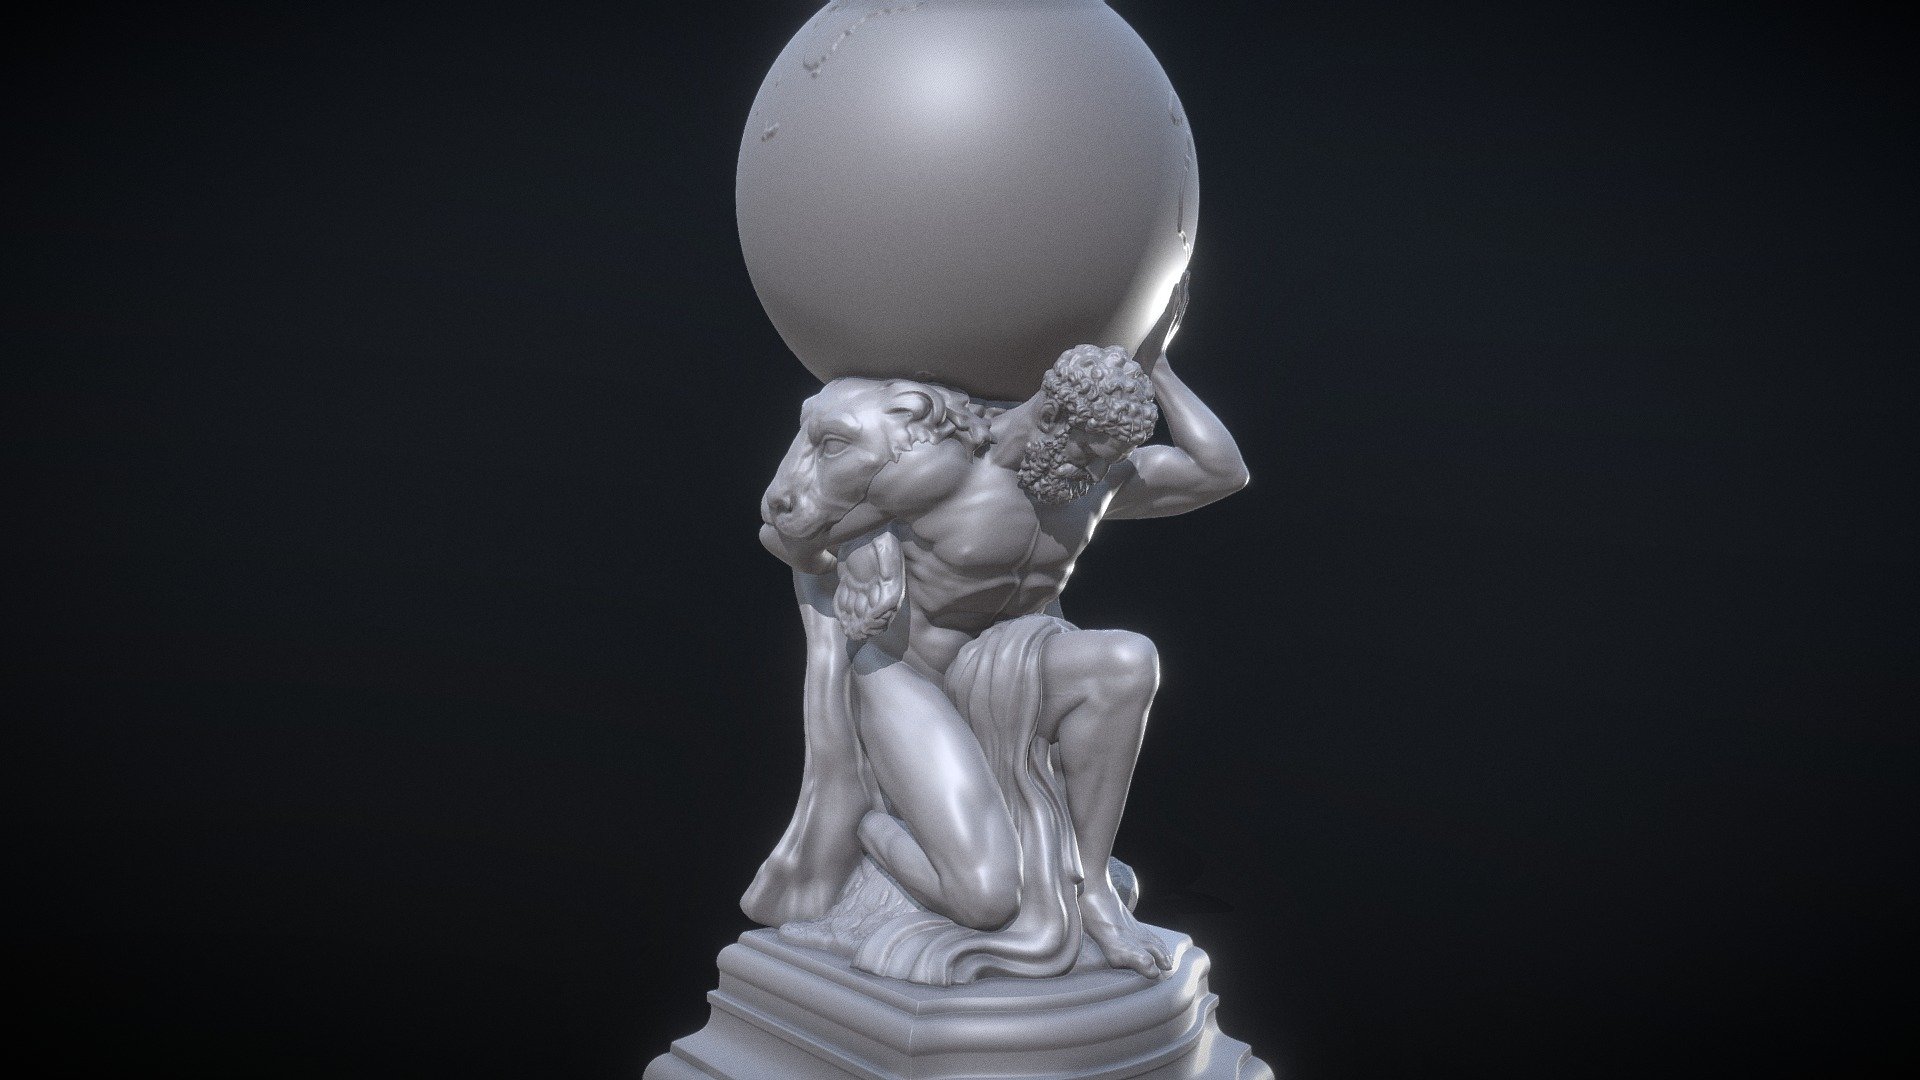 I love this statue :D
Made in Zbrush
Watertight, STL
S: 15 x 34.5 x 15.7 cm

Let me know if you have any request.

Enjoy! - Hercule holding the globe - Buy Royalty Free 3D model by Omassyx 3d model